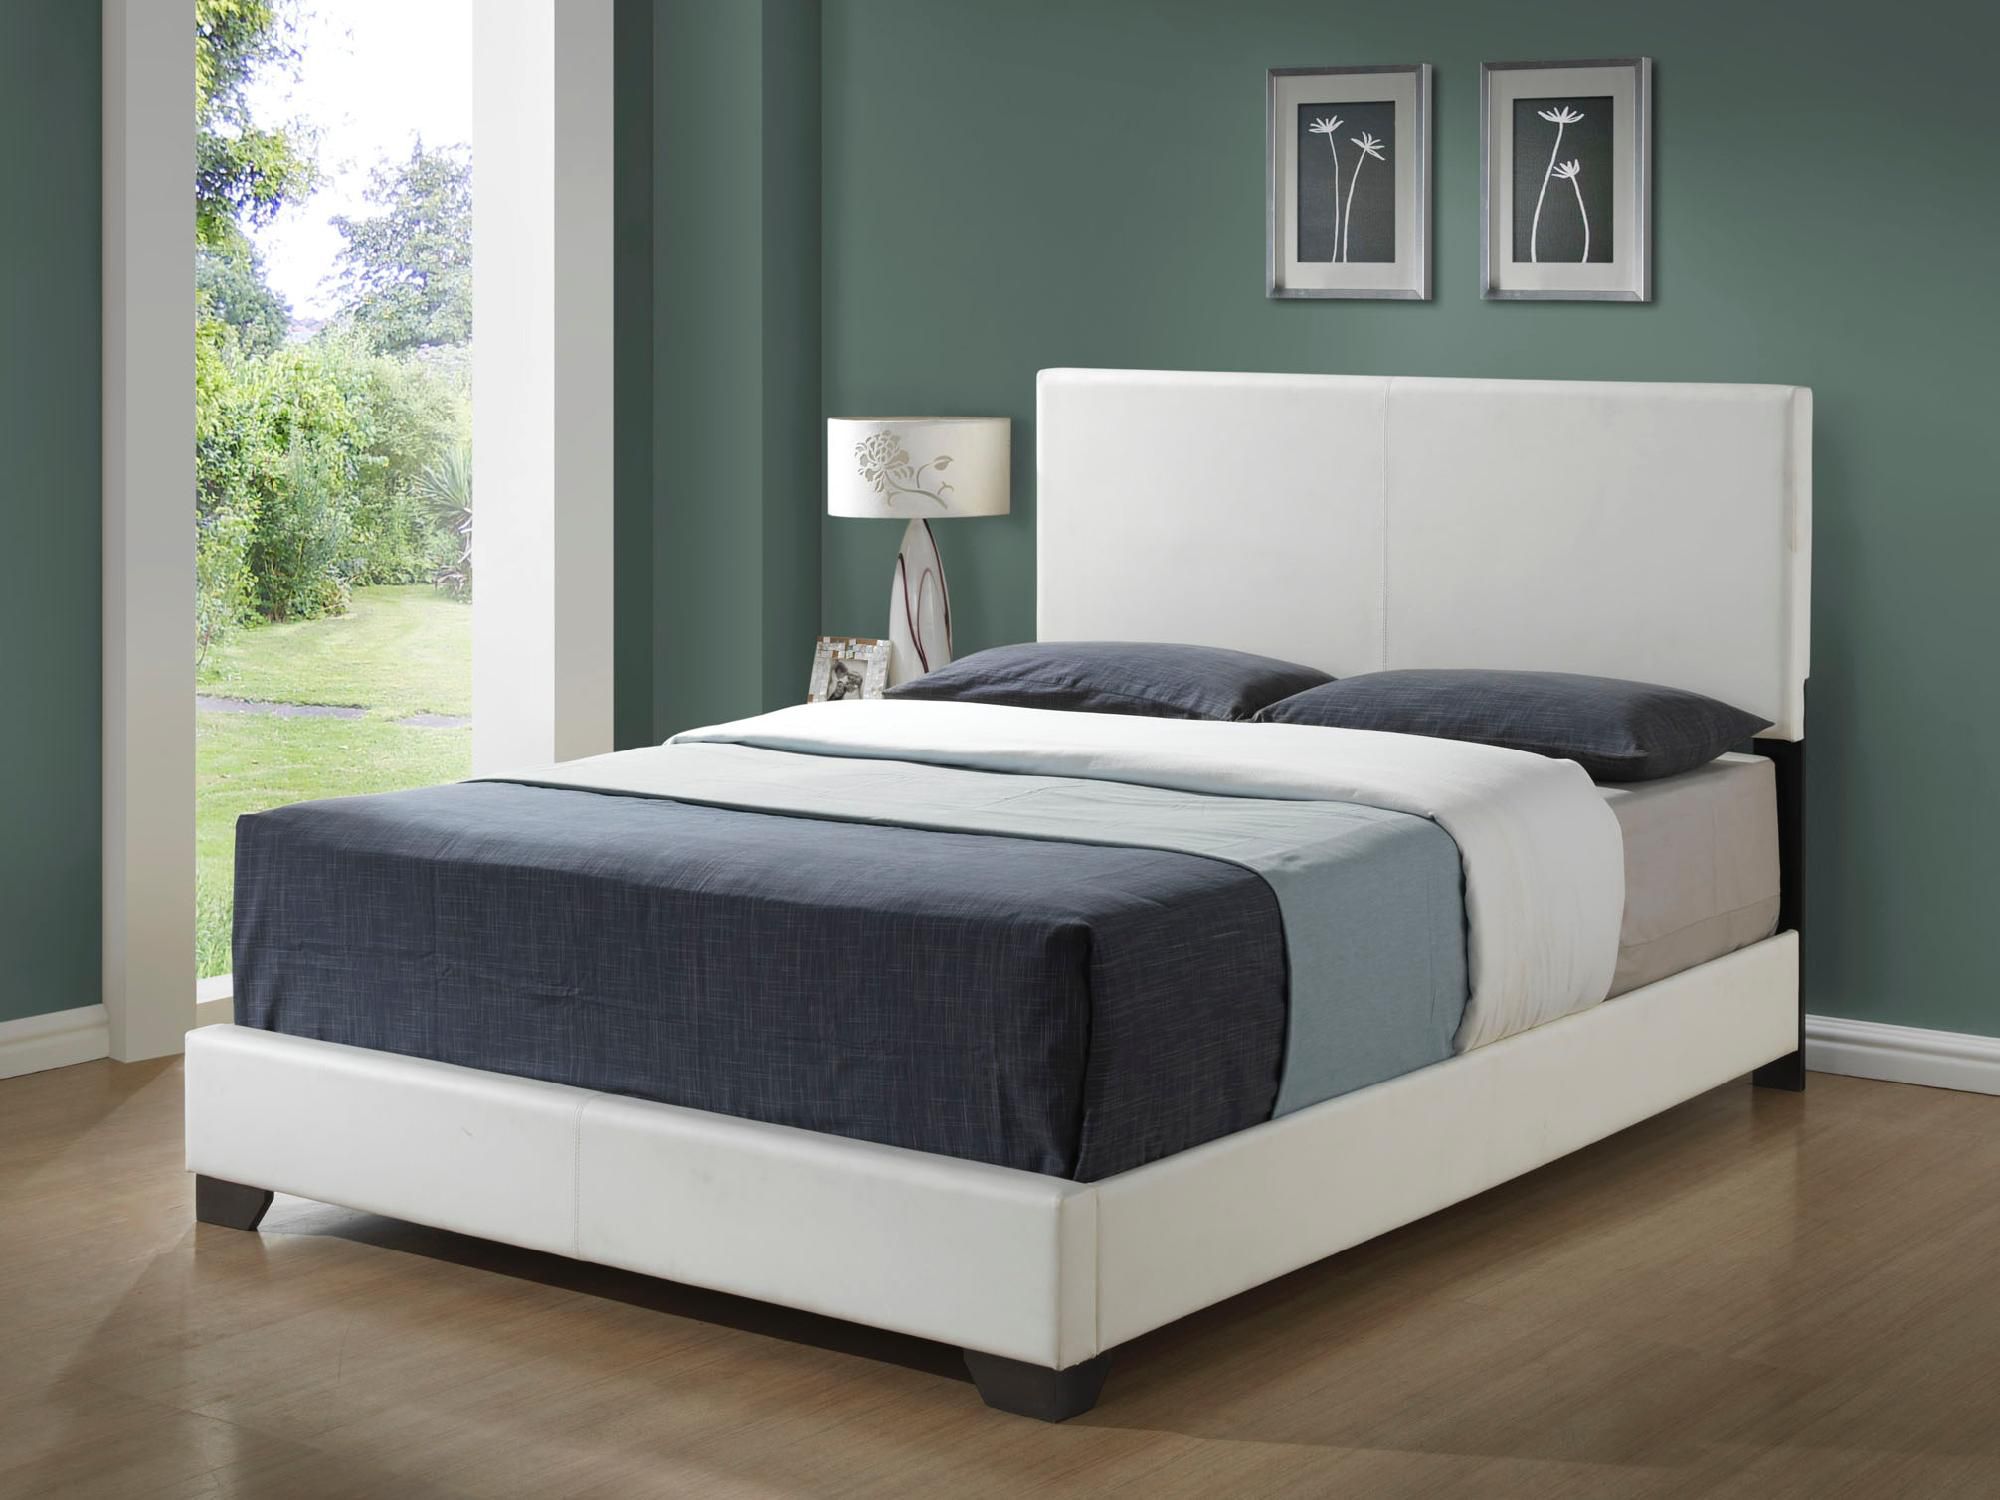 BED - QUEEN SIZE / WHITE LEATHER-LOOK FABRIC